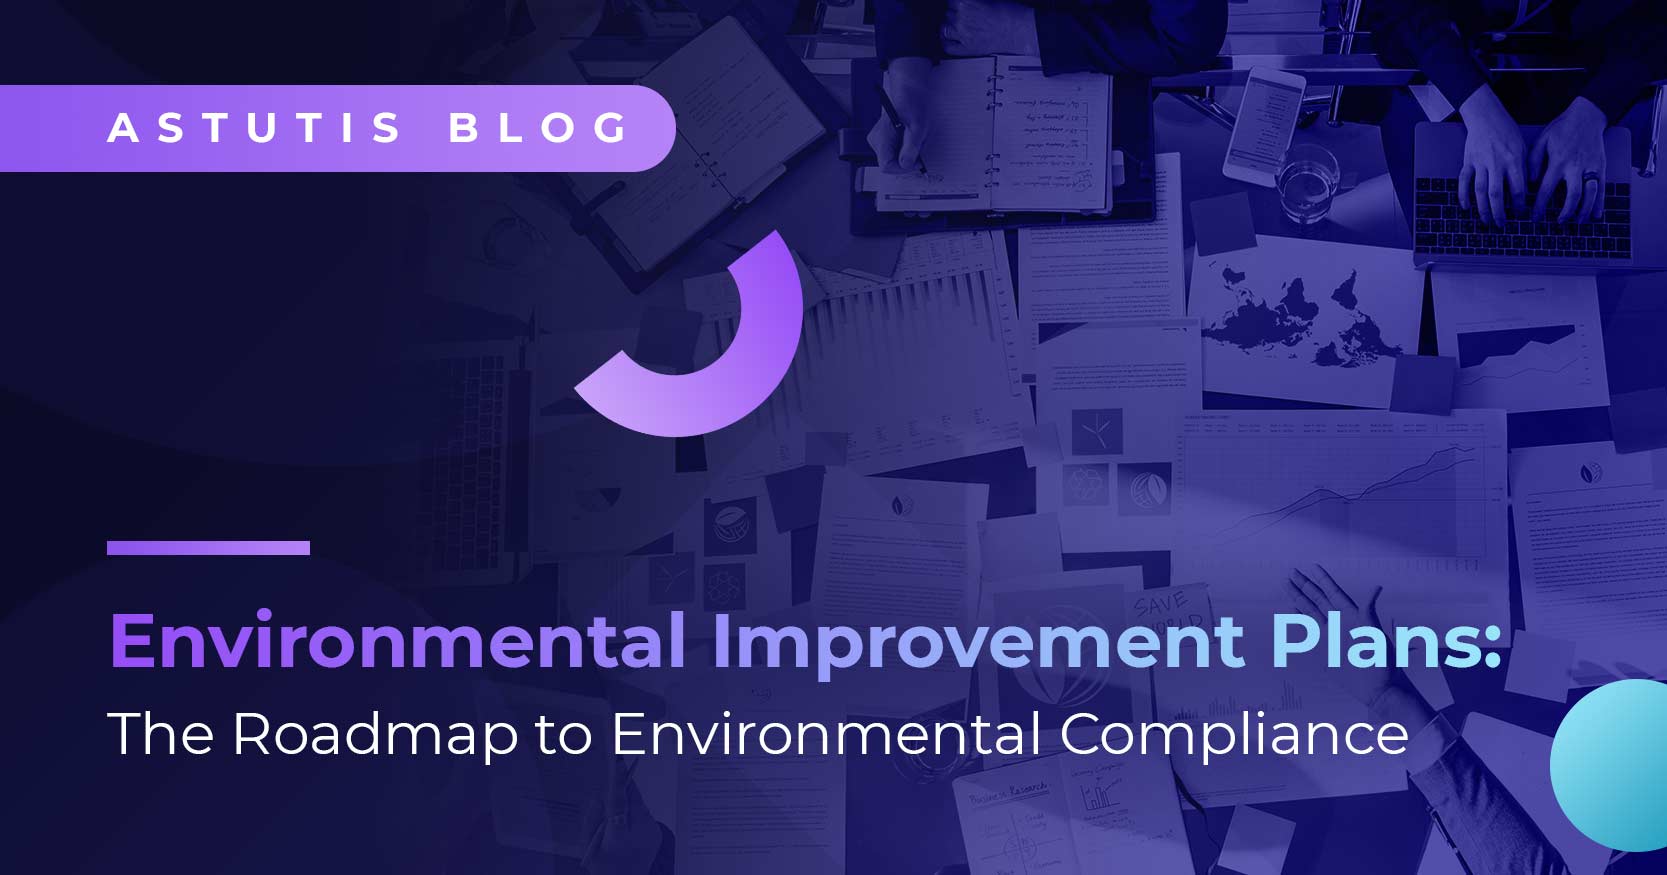 The Roadmap to Environmental Compliance: How to Build your Environment Improvement Plan Image